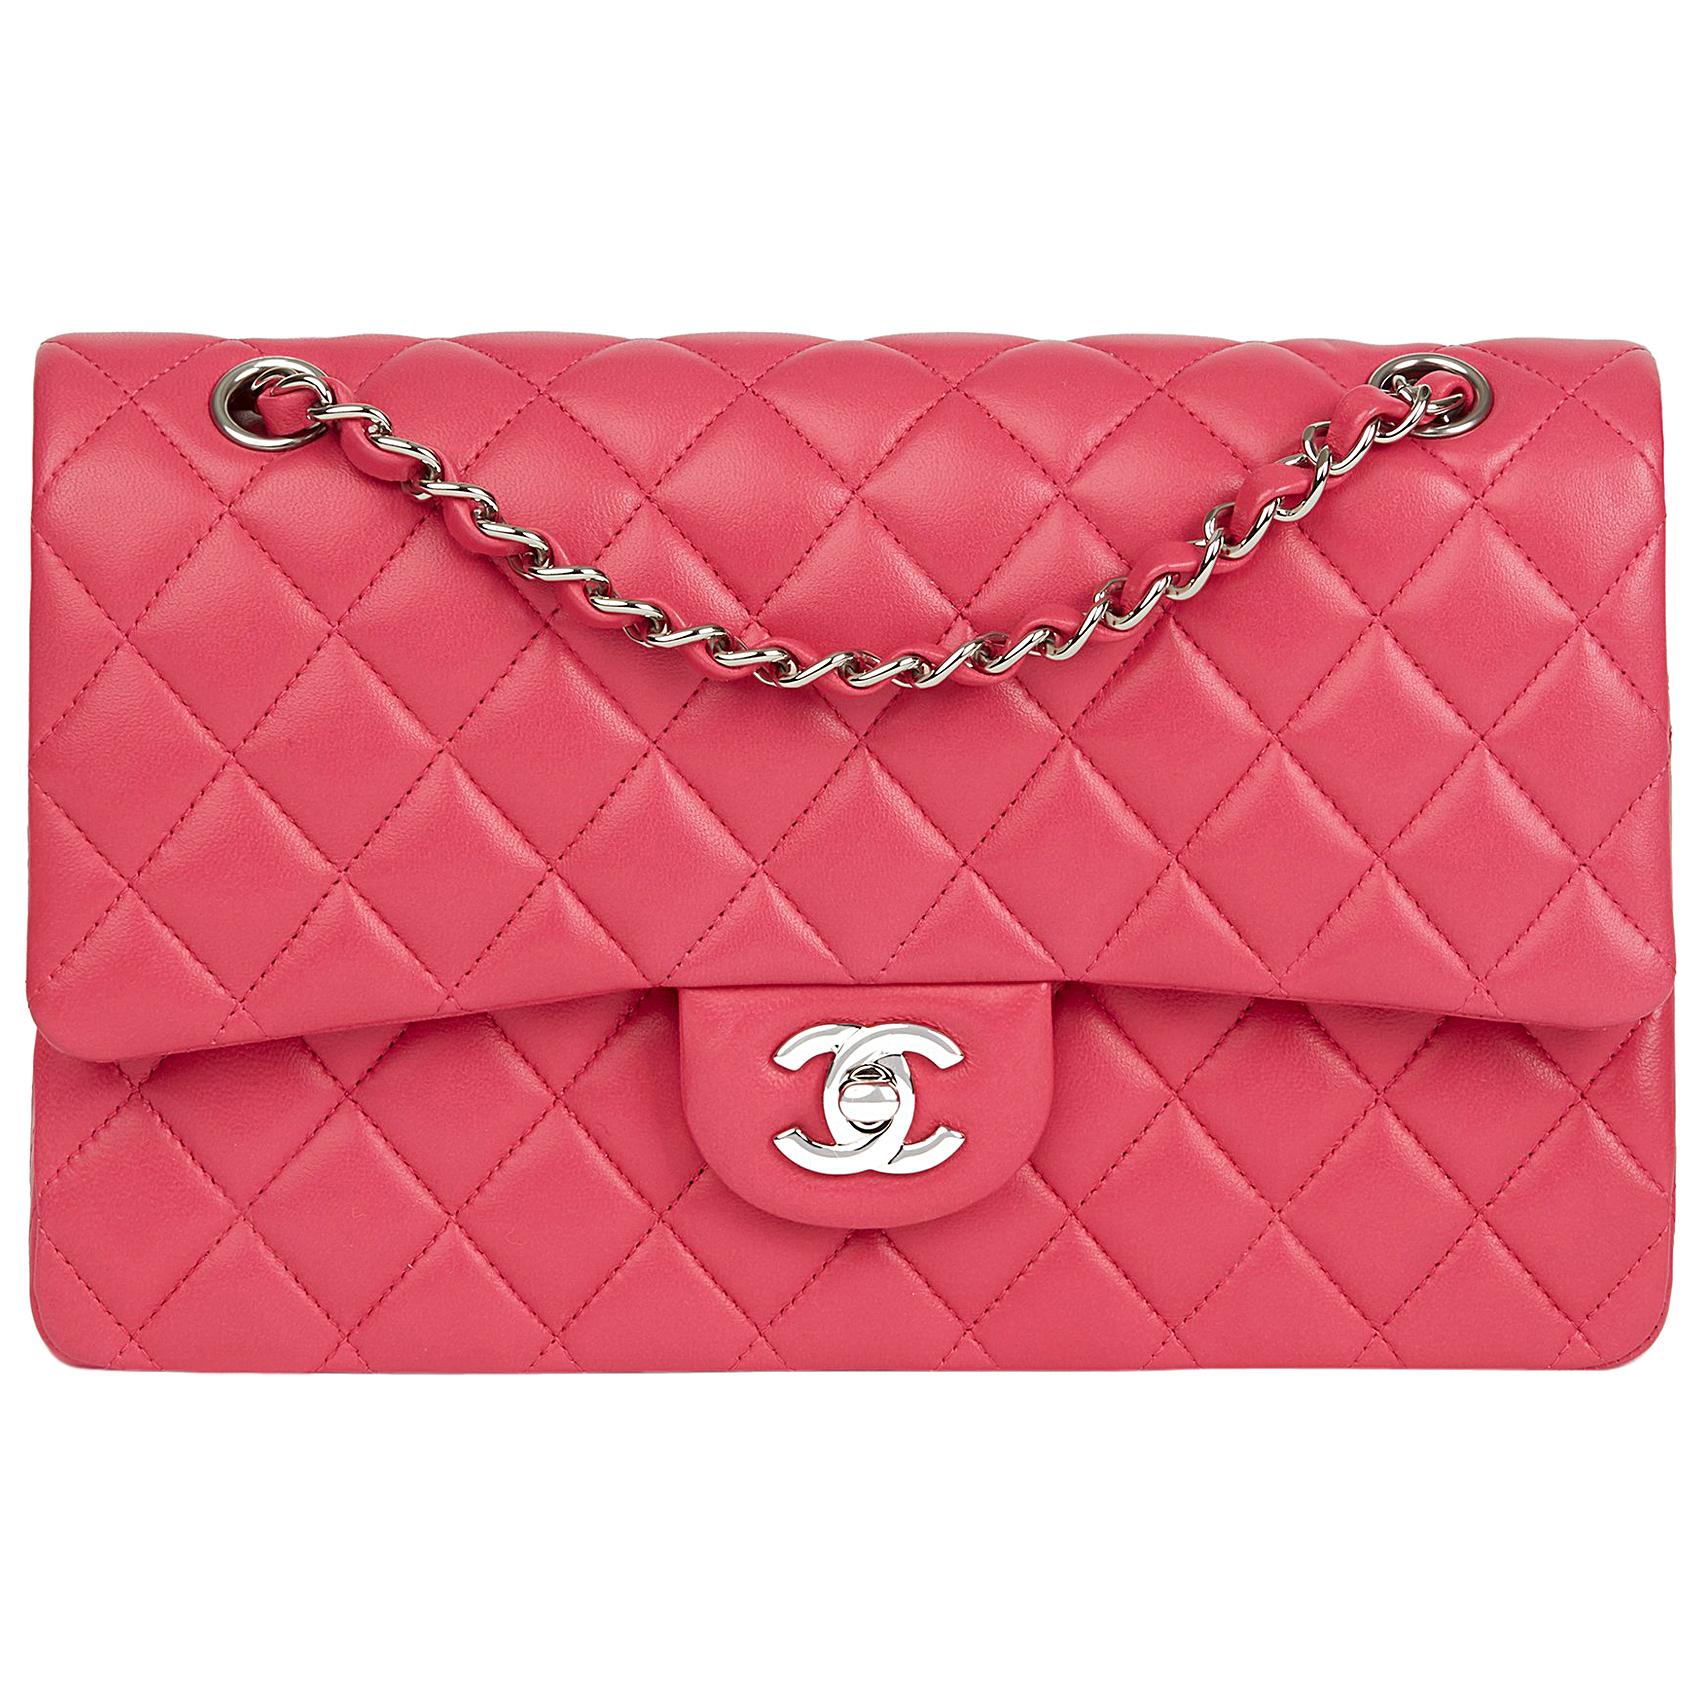 2014 Chanel Fuchsia Quilted Lambskin Medium Classic Double Flap Bag